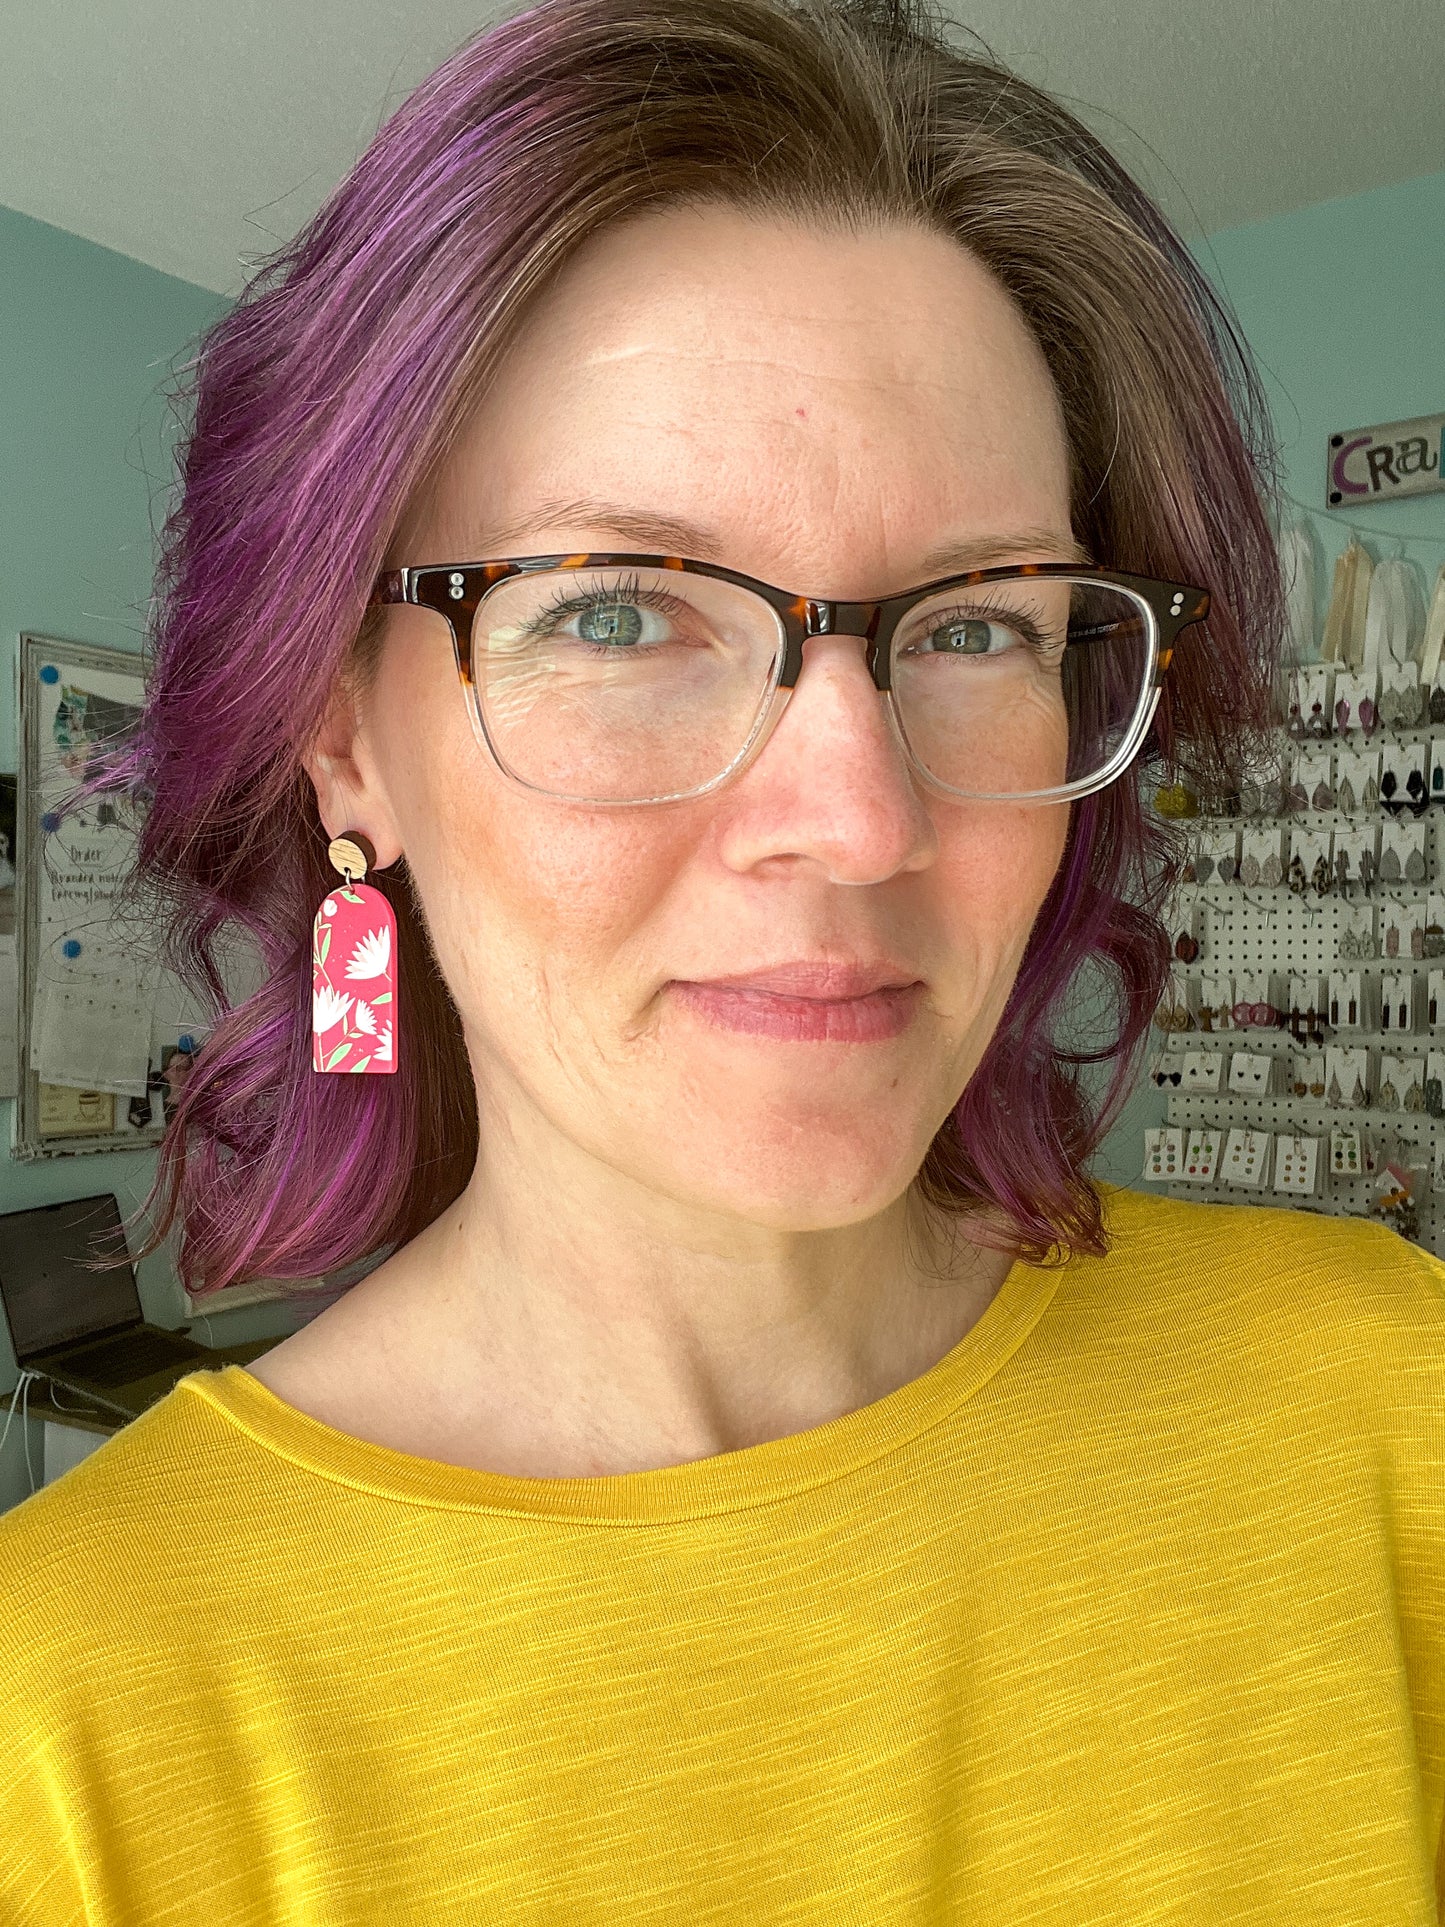 Pink Floral Acrylic & Resin Dangle Earrings: Choose From 2 Styles